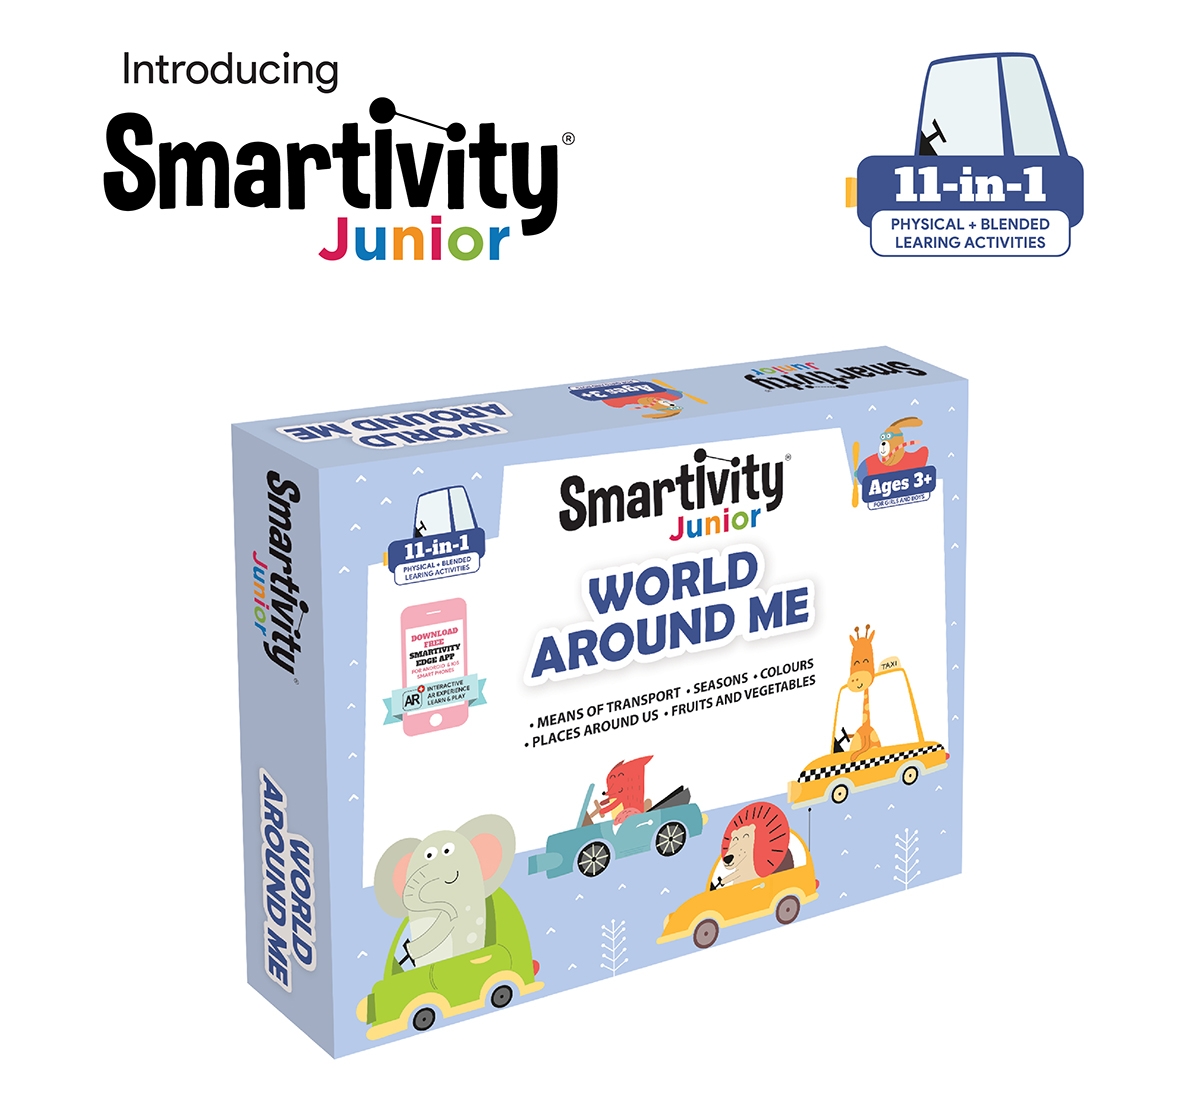 Smartivity | Smartivity Junior World Around Me Pre-School STEAM Learning Educational Toy Art & Craft Play 11 in 1 Activity Kit 0